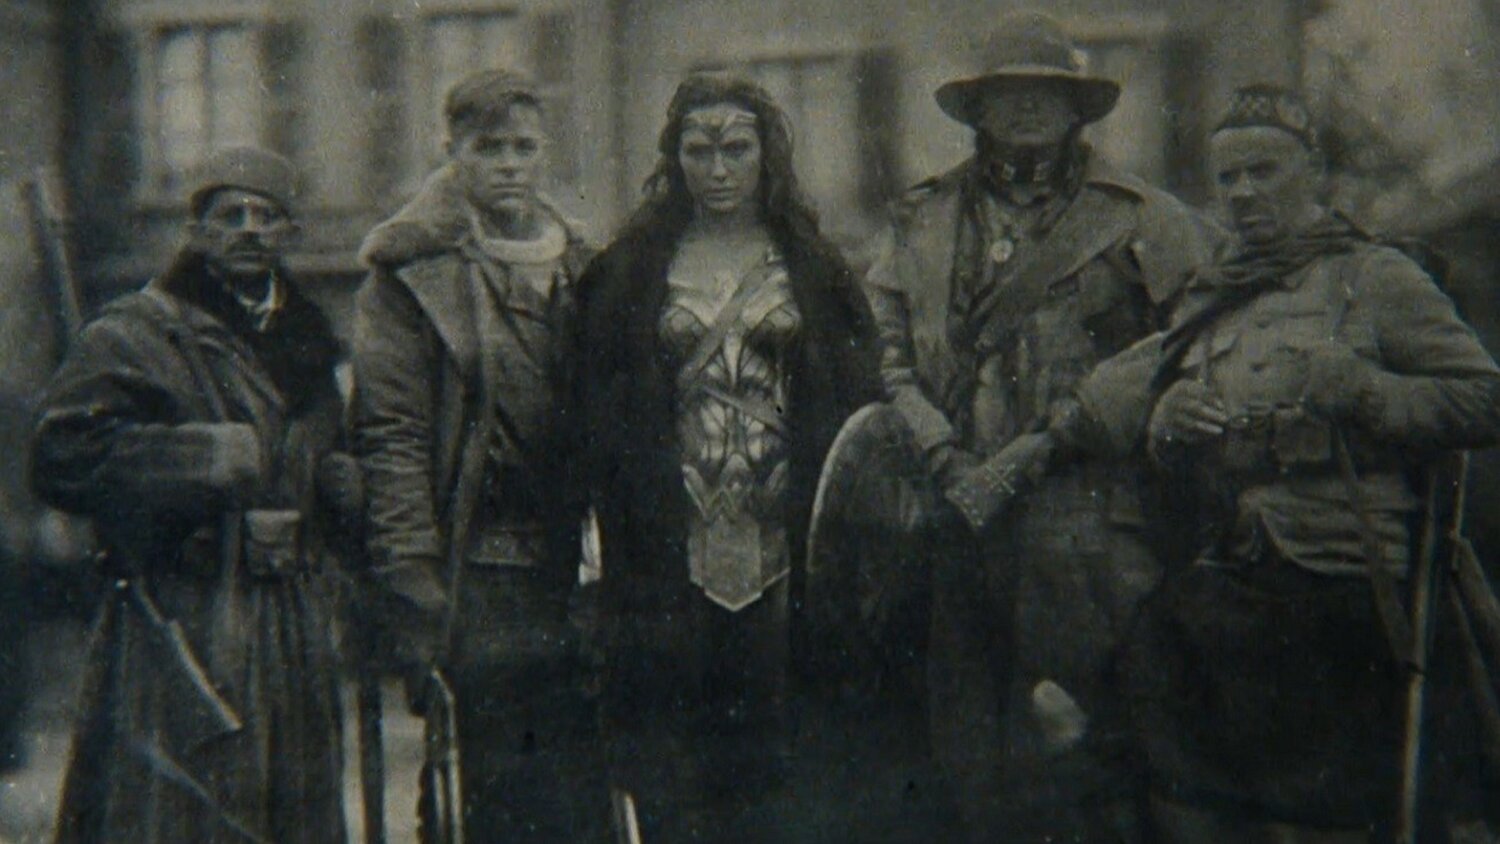 zack-snyder-shares-unused-wonder-woman-photo-that-would-have-her-movie-origin-story.jpg